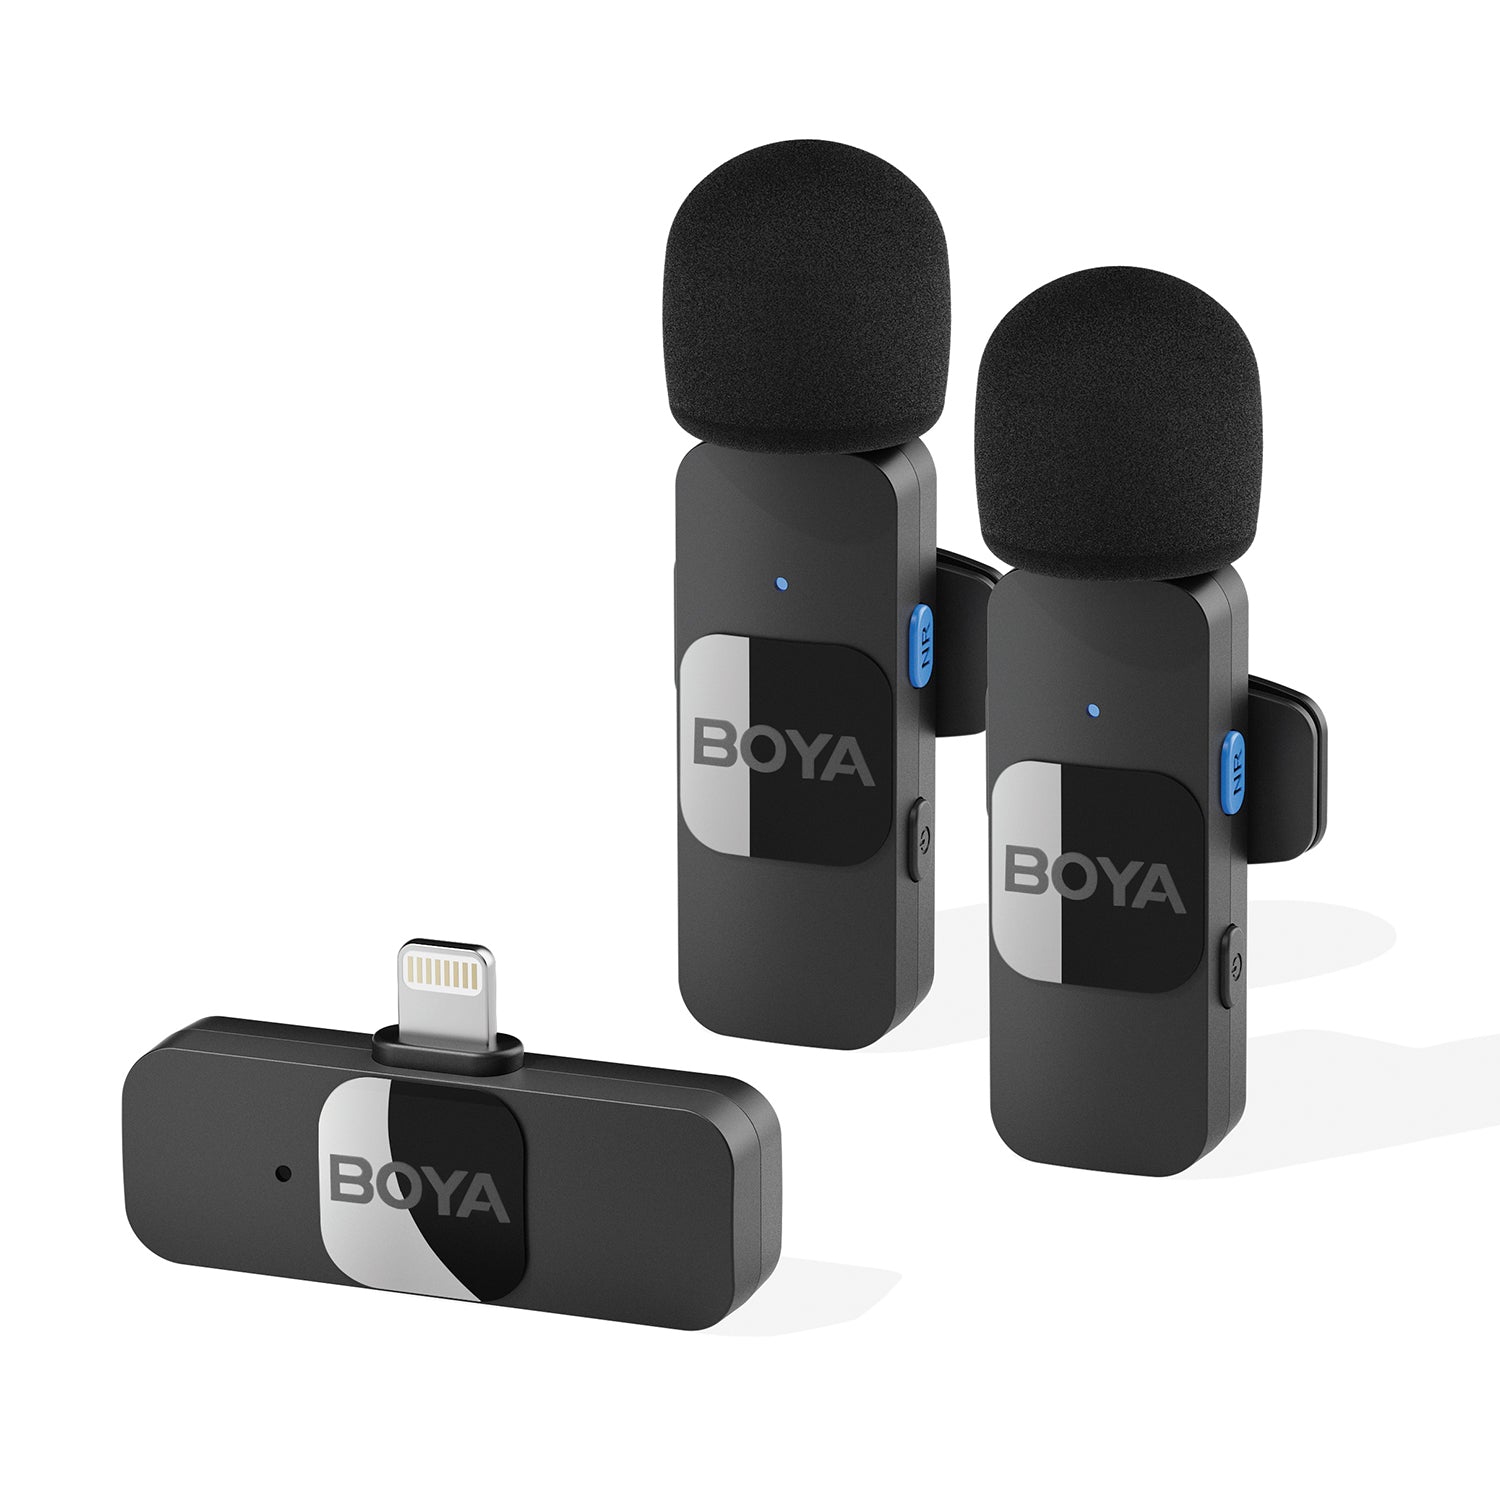 BOYA BY-V2 Dual Wireless Lavalier Microphone for iPhone